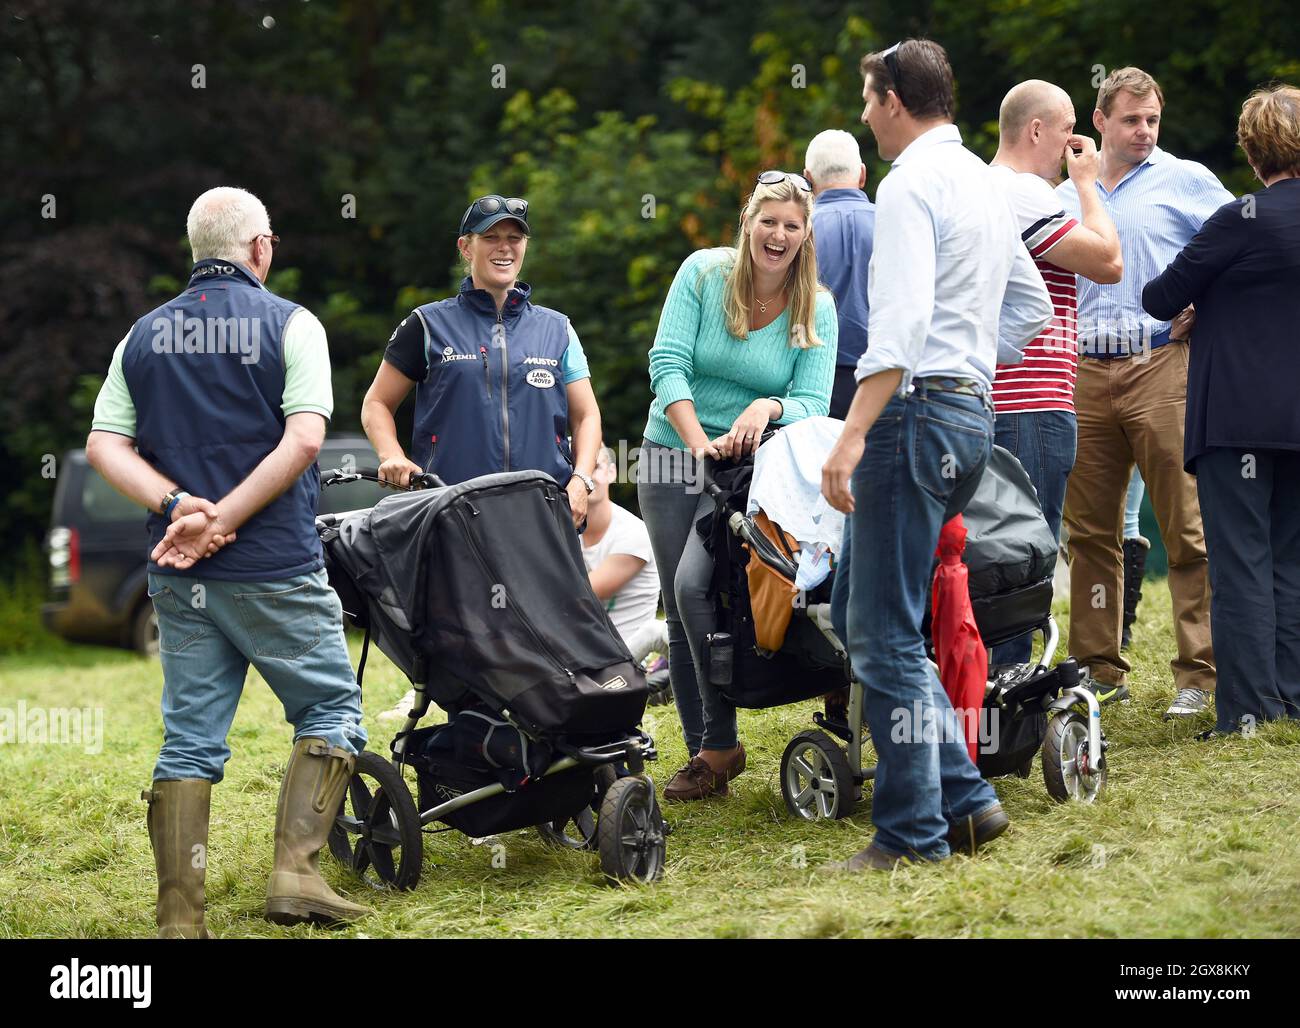 Zara Phillips and Mike Tindall chat with friends during the Festival of  British Eventing at Gatcombe Park, Minchinhampton Stock Photo - Alamy